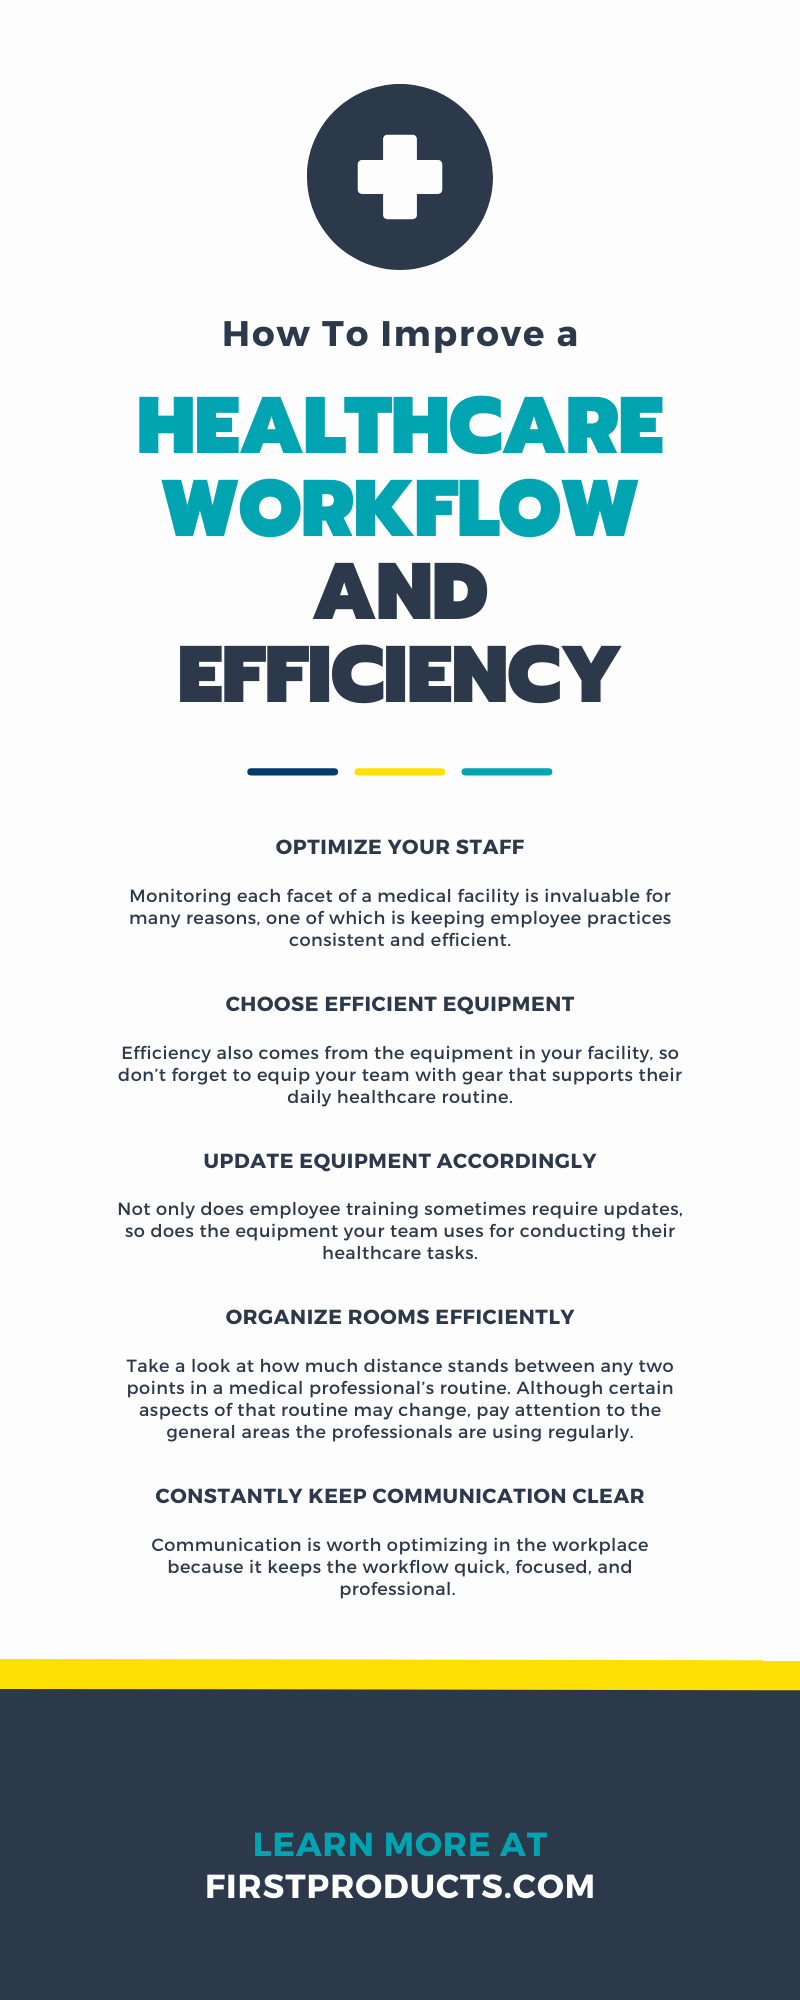 How To Improve a Healthcare Workflow and Efficiency